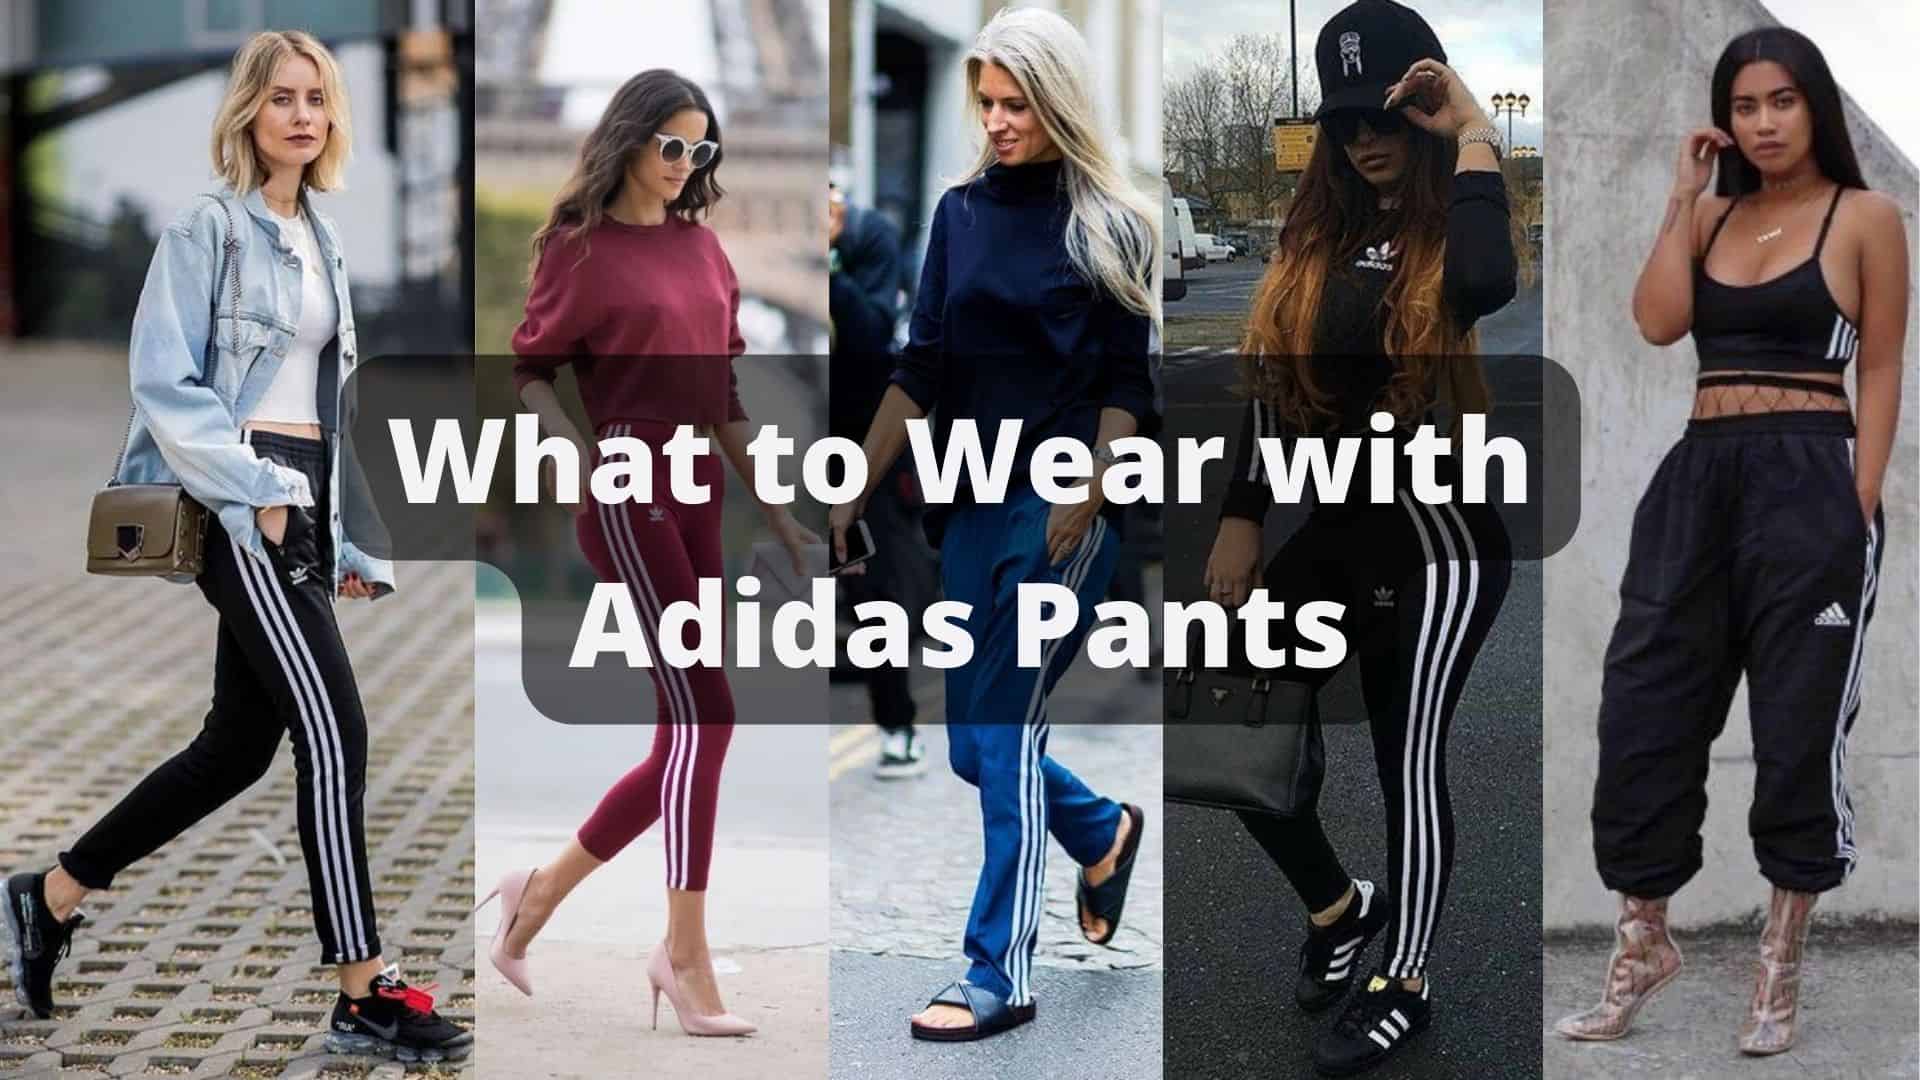 What to wear with Adidas Pants